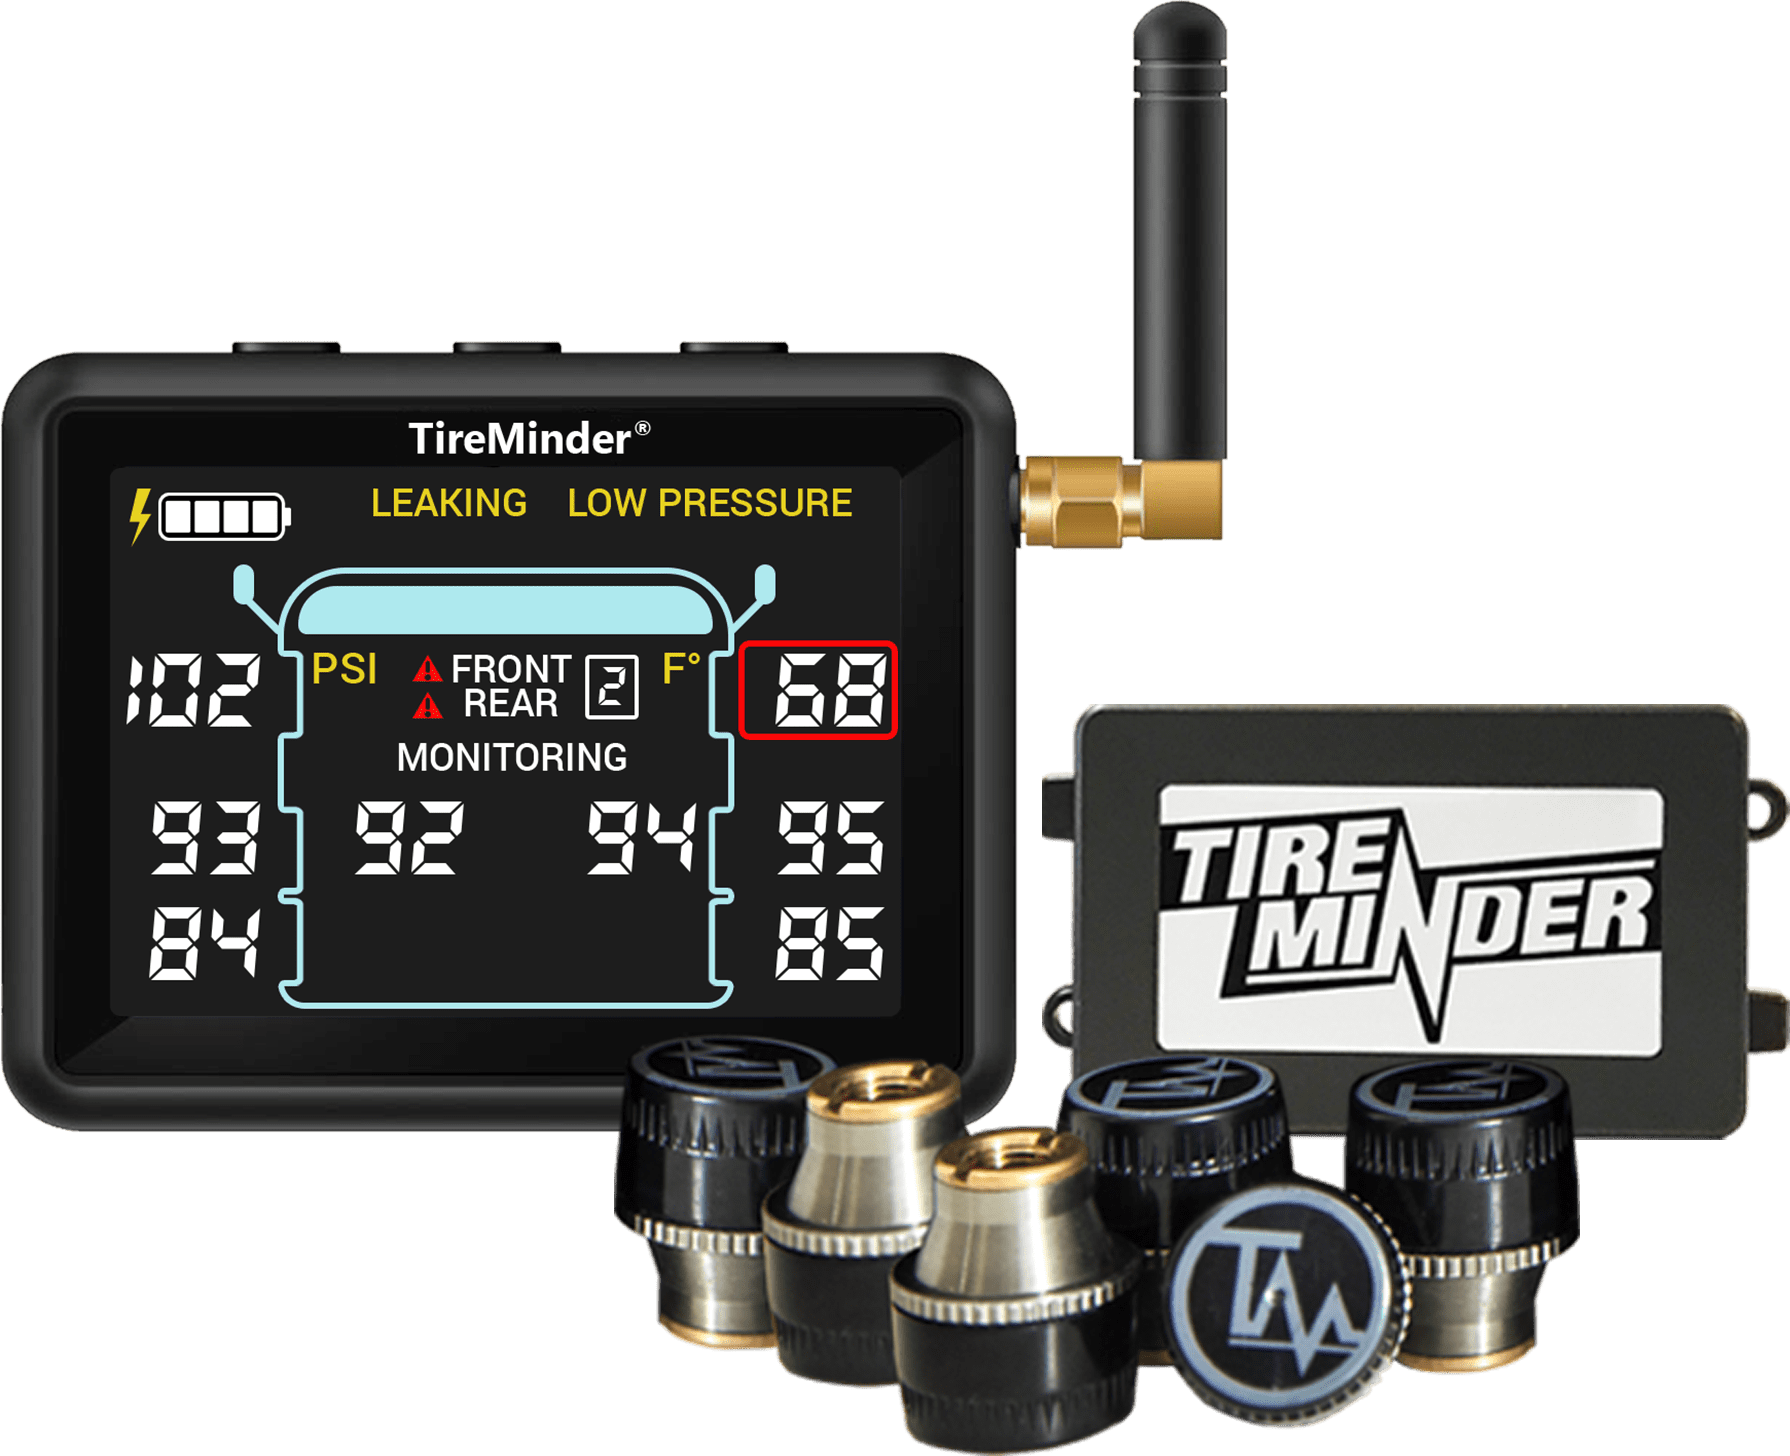 TireMinder | TM22142 | i10 RV TPMS with 6 Transmitters